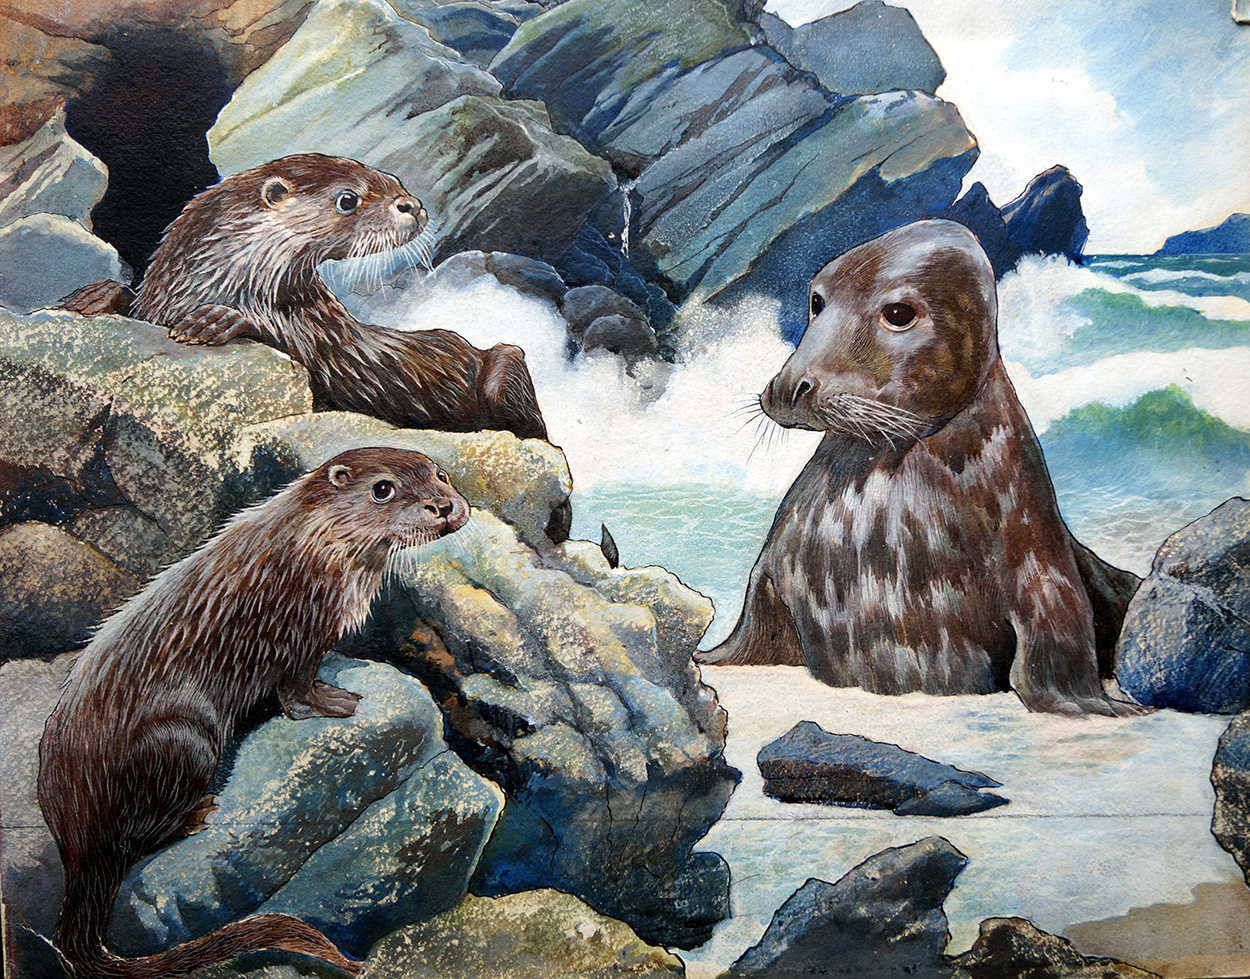 Seal and Sea Otters (Original) art by G W Backhouse Art at The Illustration Art Gallery